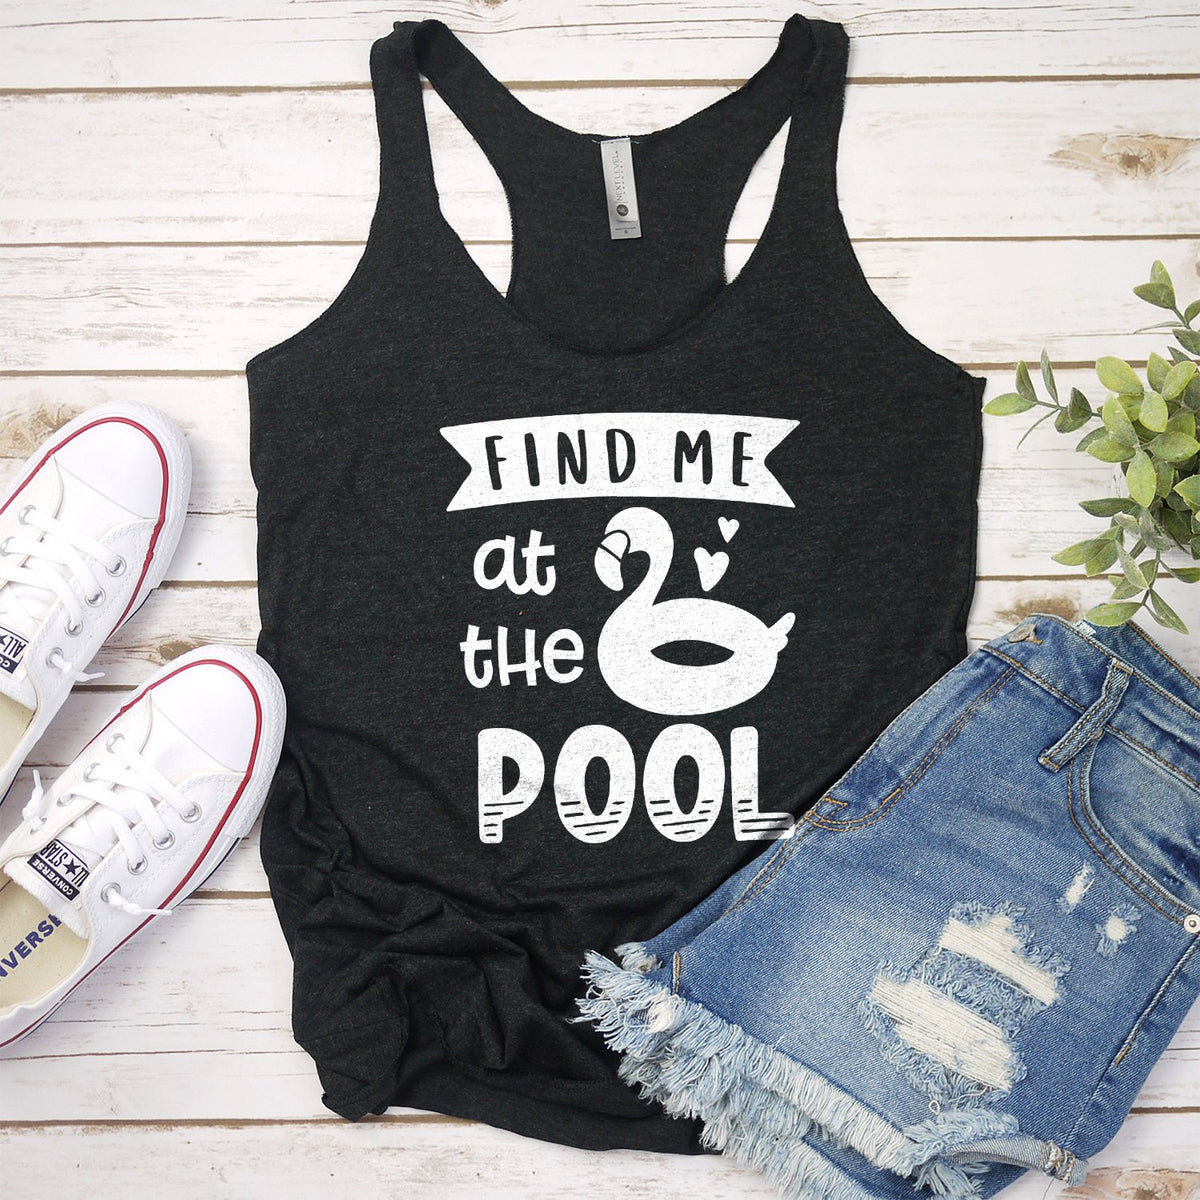 Find Me At The Pool - Tank Top Racerback